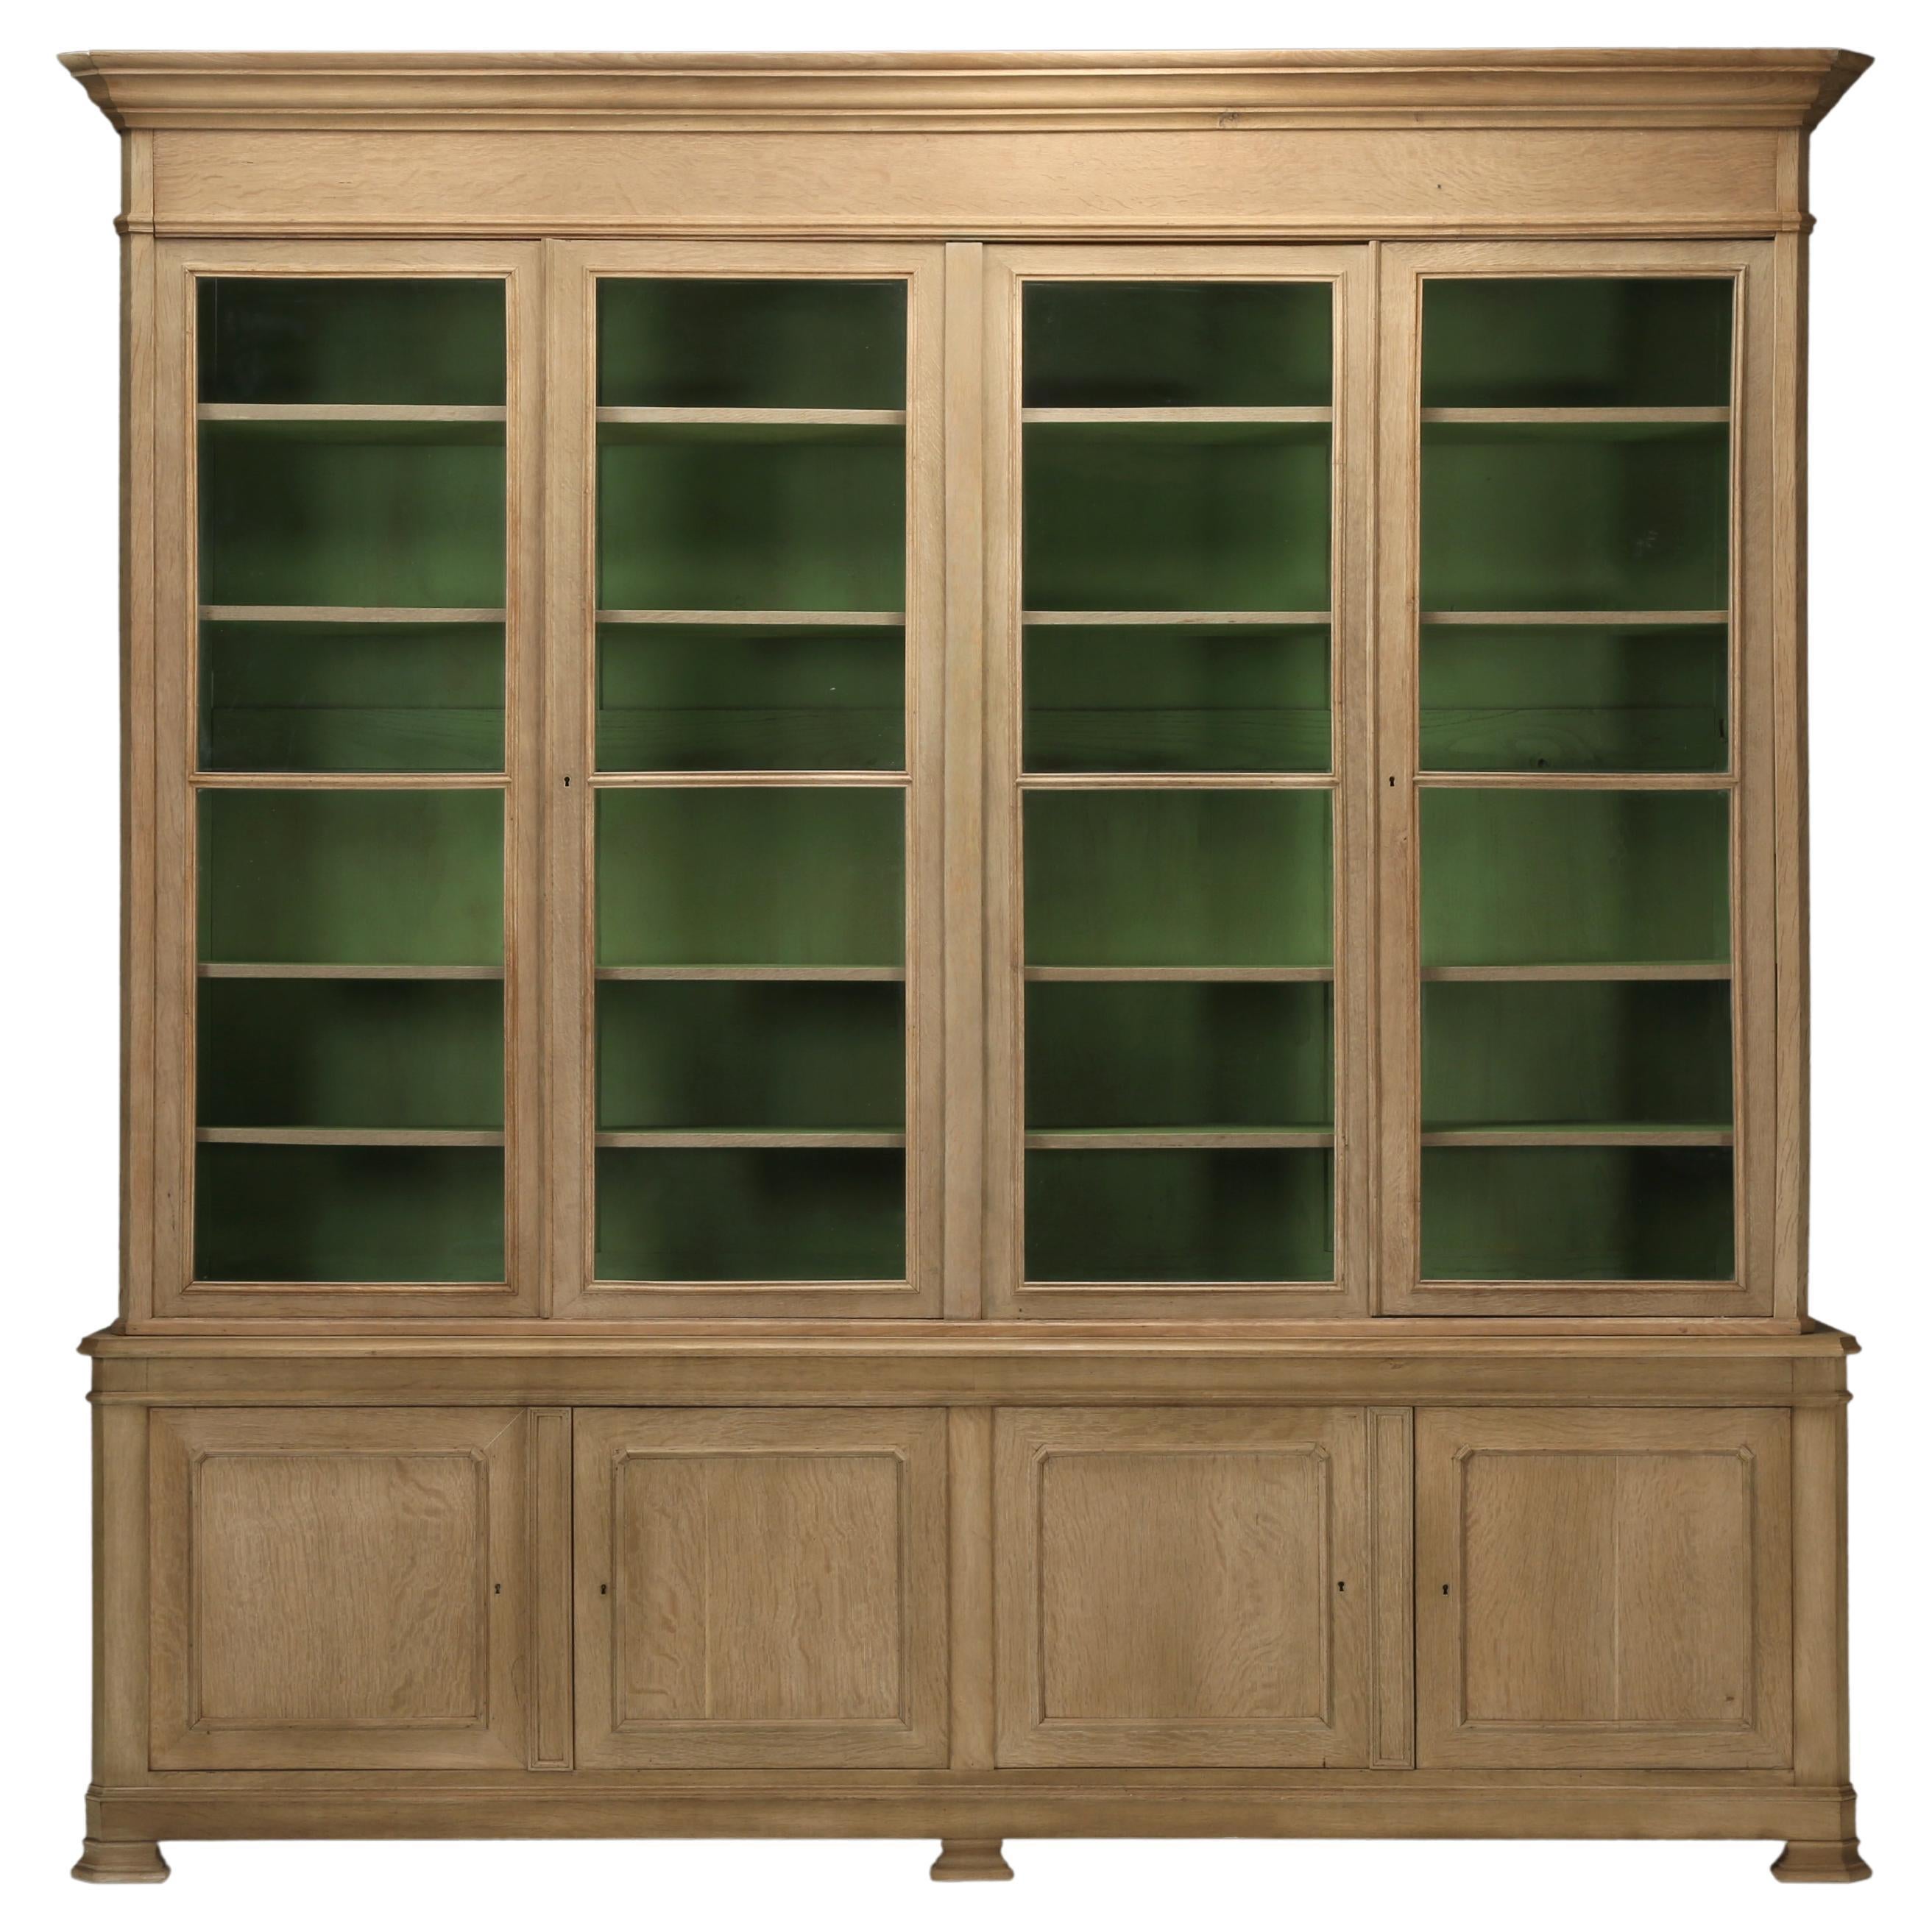 French Bookcase or Bibliothèque Louis Philippe Washed Oak Original Glass, c1800s For Sale